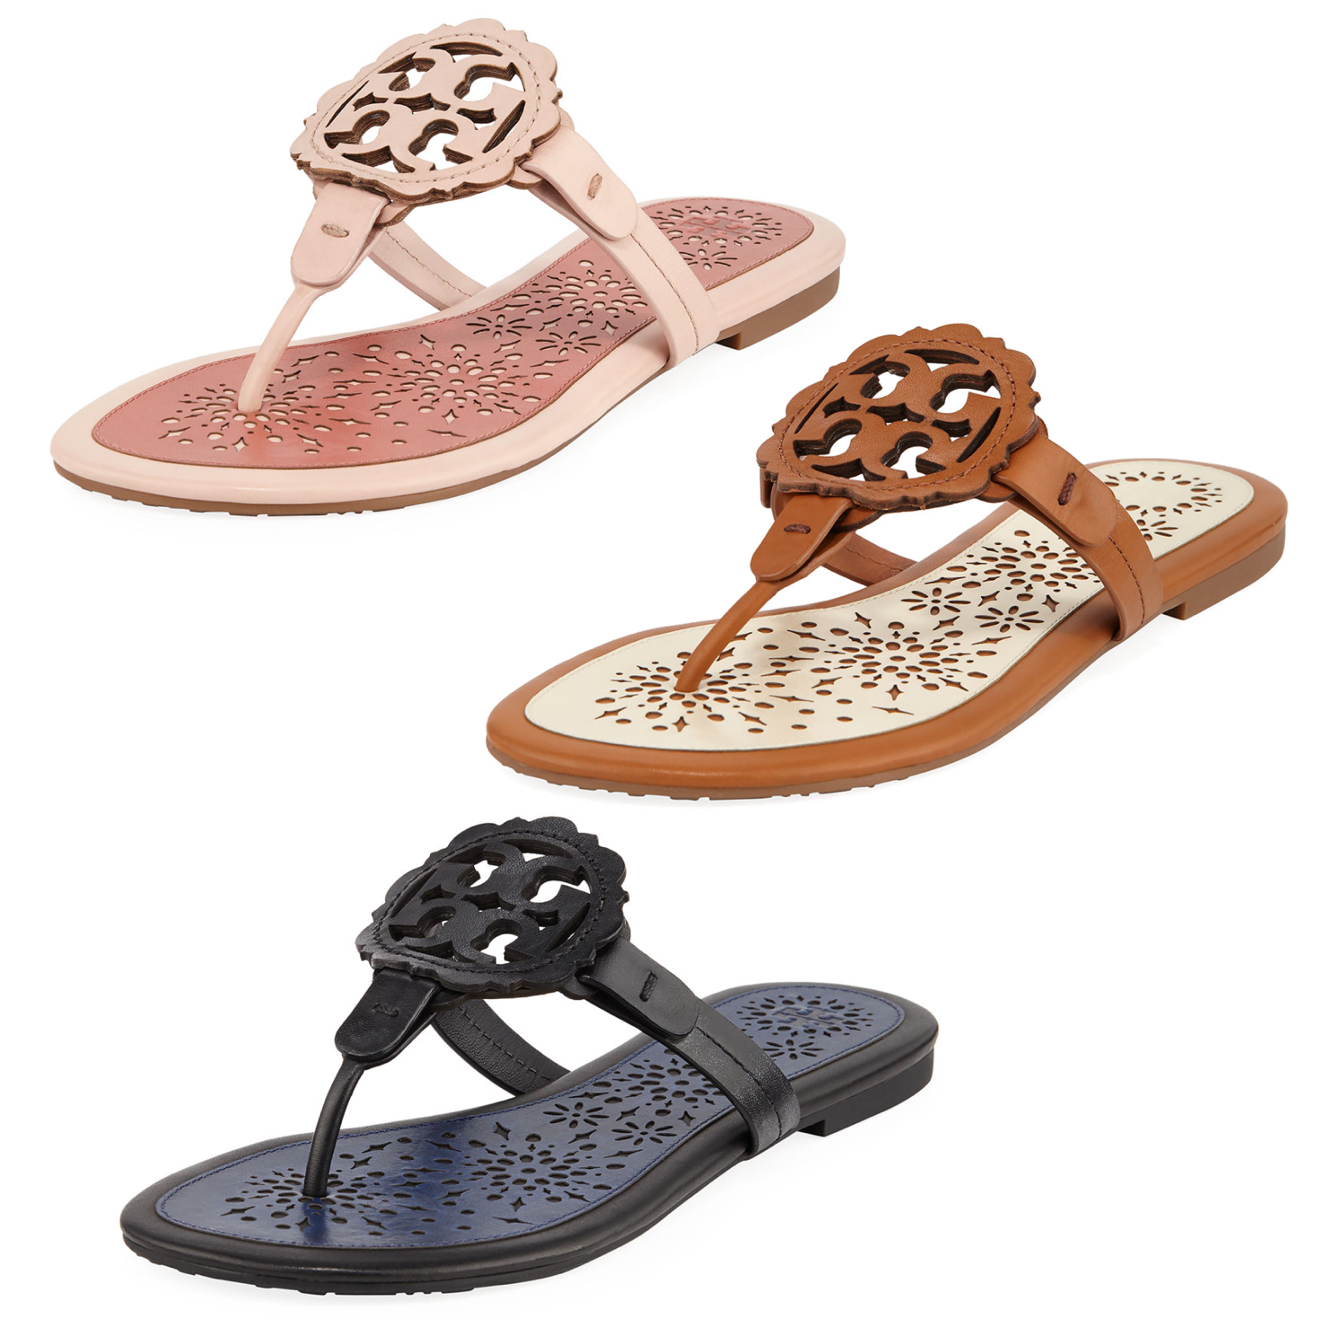 New Tory Burch Miller Sandals + $50 Off Promo! - The Double Take Girls